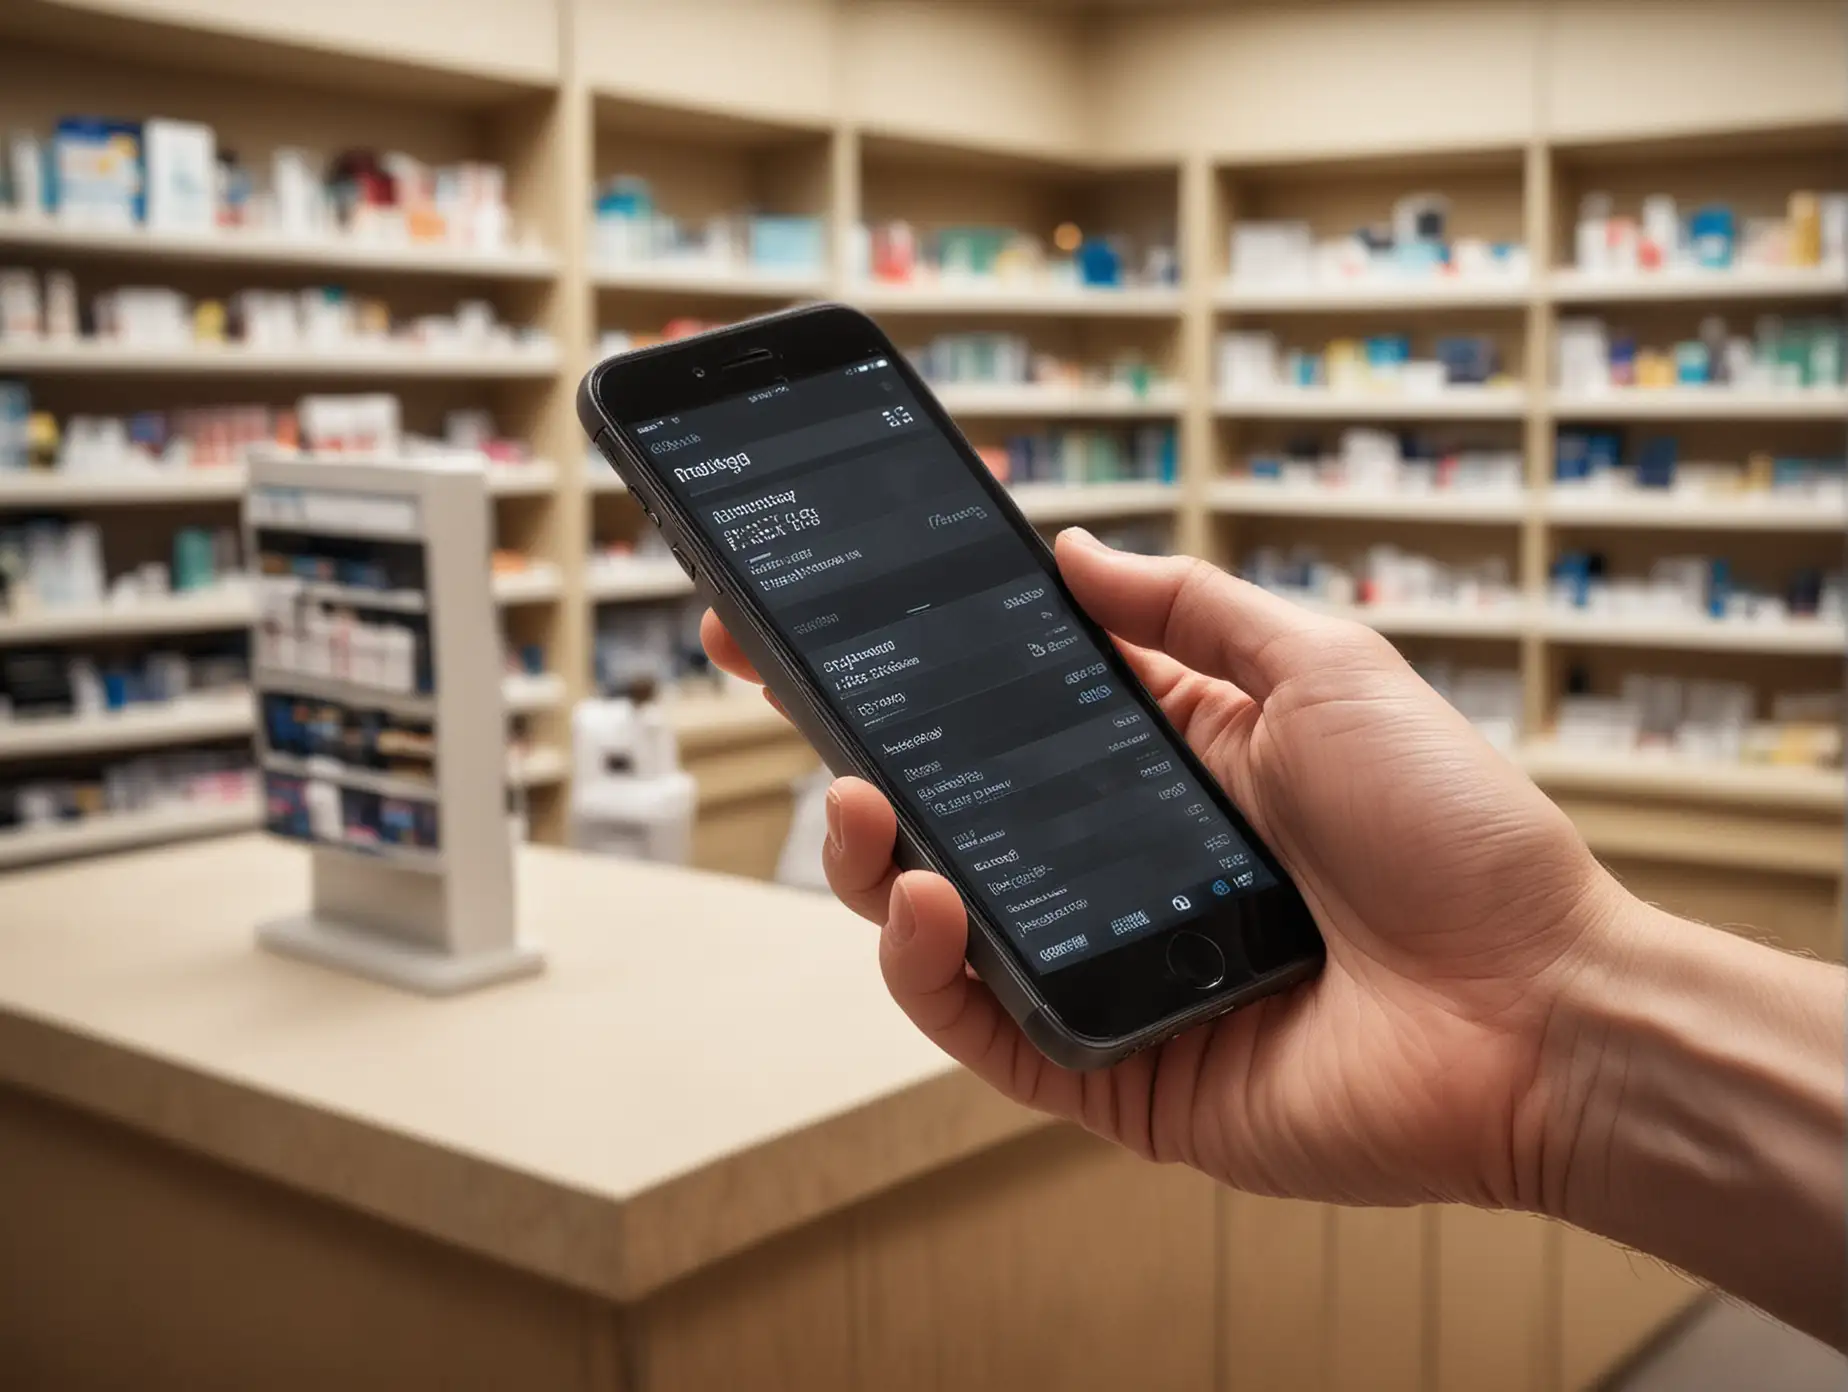 Create a realistic close-up photo of a hand holding an iPhone with a black screen and making a payment at a pharmacy checkout terminal. The focus should be on the hand and the terminal, and these elements must be clear and detailed. There should be blurred pharmacy shelves and pharmacists working there in the background, giving a sense of scenery without distracting from the main topics. The telephone and terminal should be modern and typical of a modern pharmacy. Make sure the lighting is natural and the image is of professional quality.